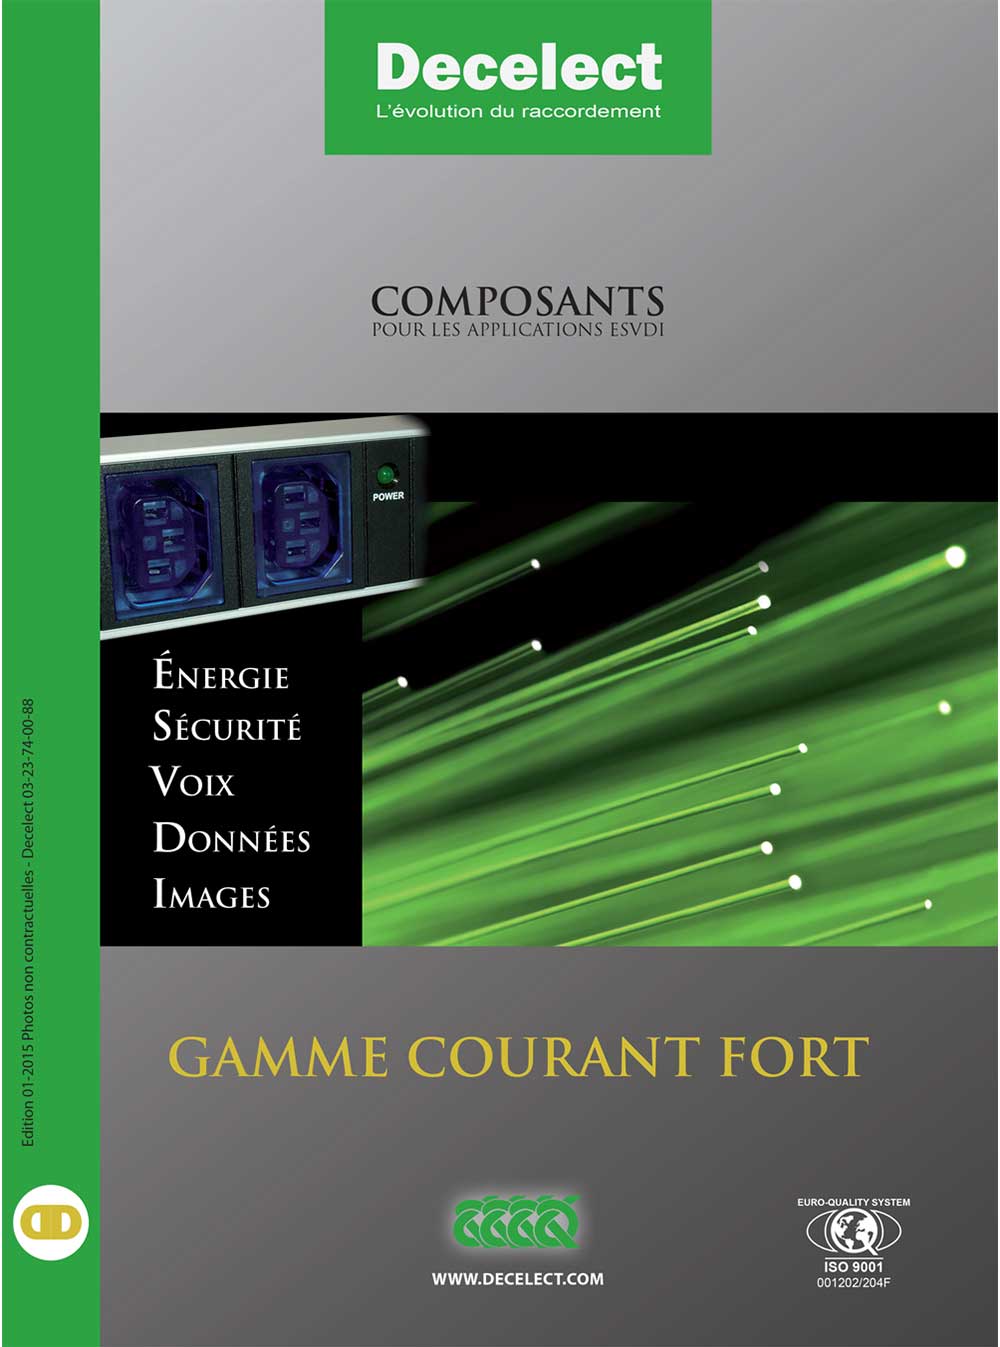 Gamme Courant Fort